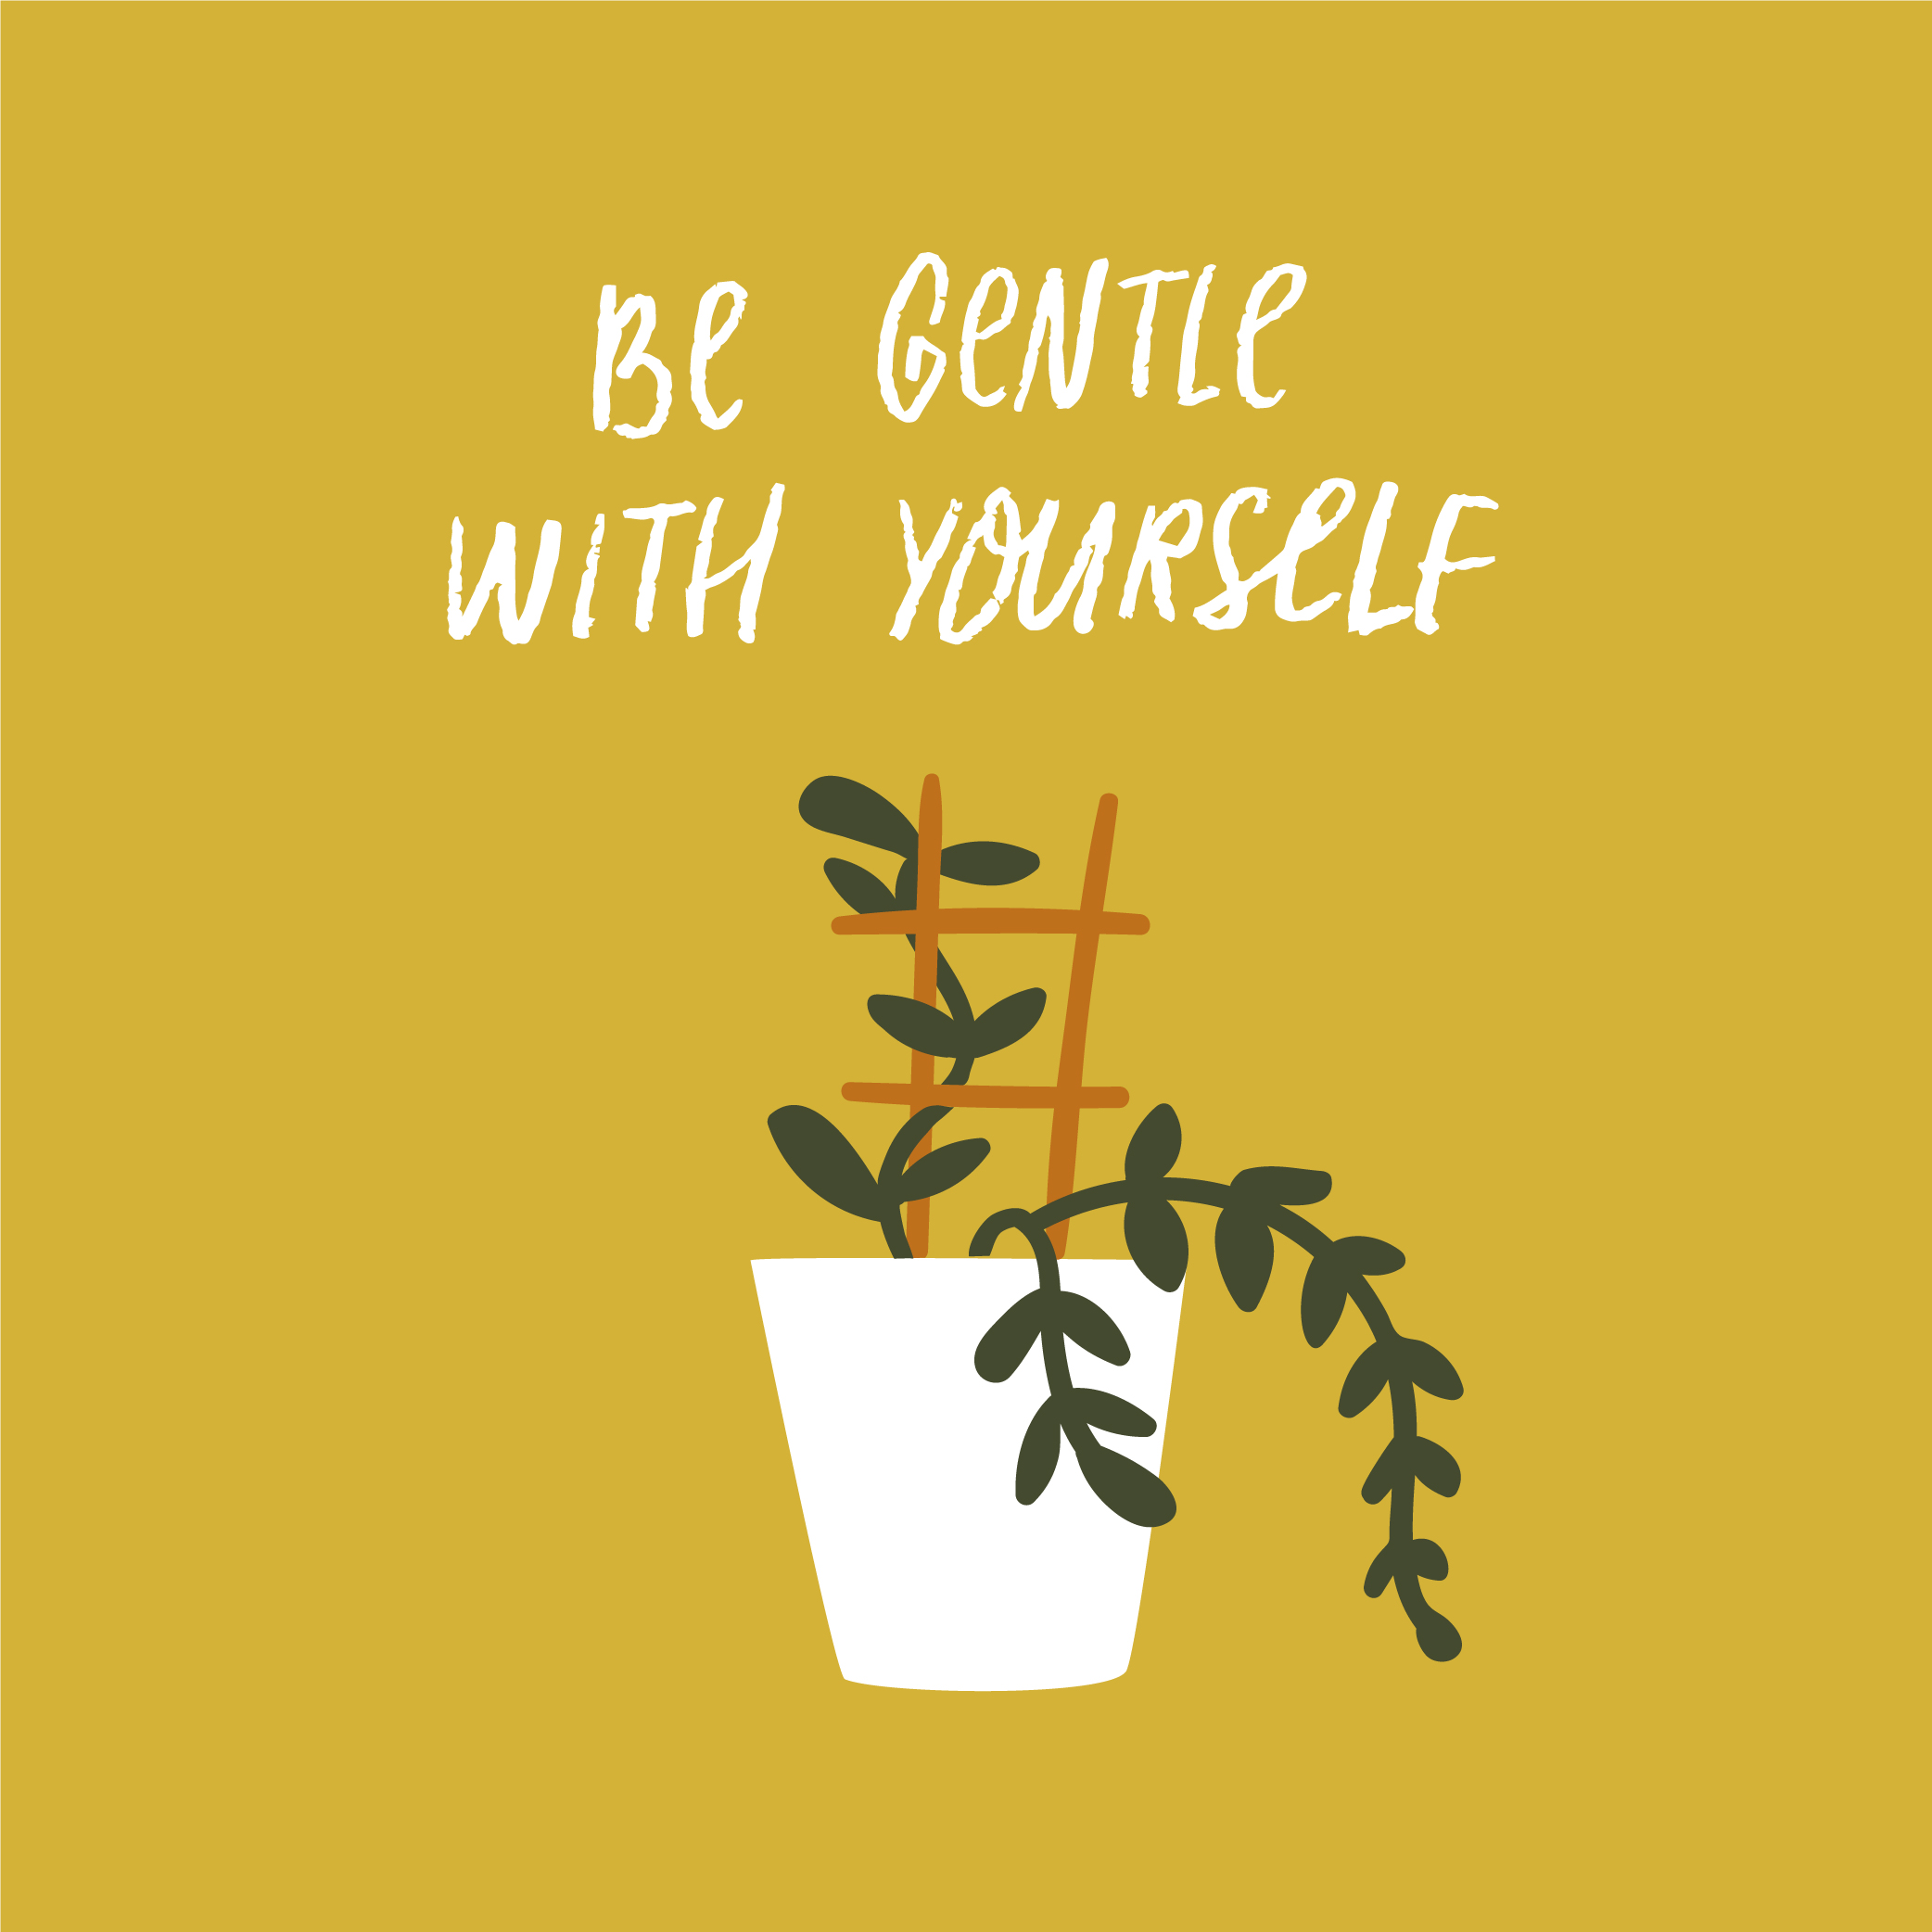 An illustration of a plant "Be gentle with yourself"